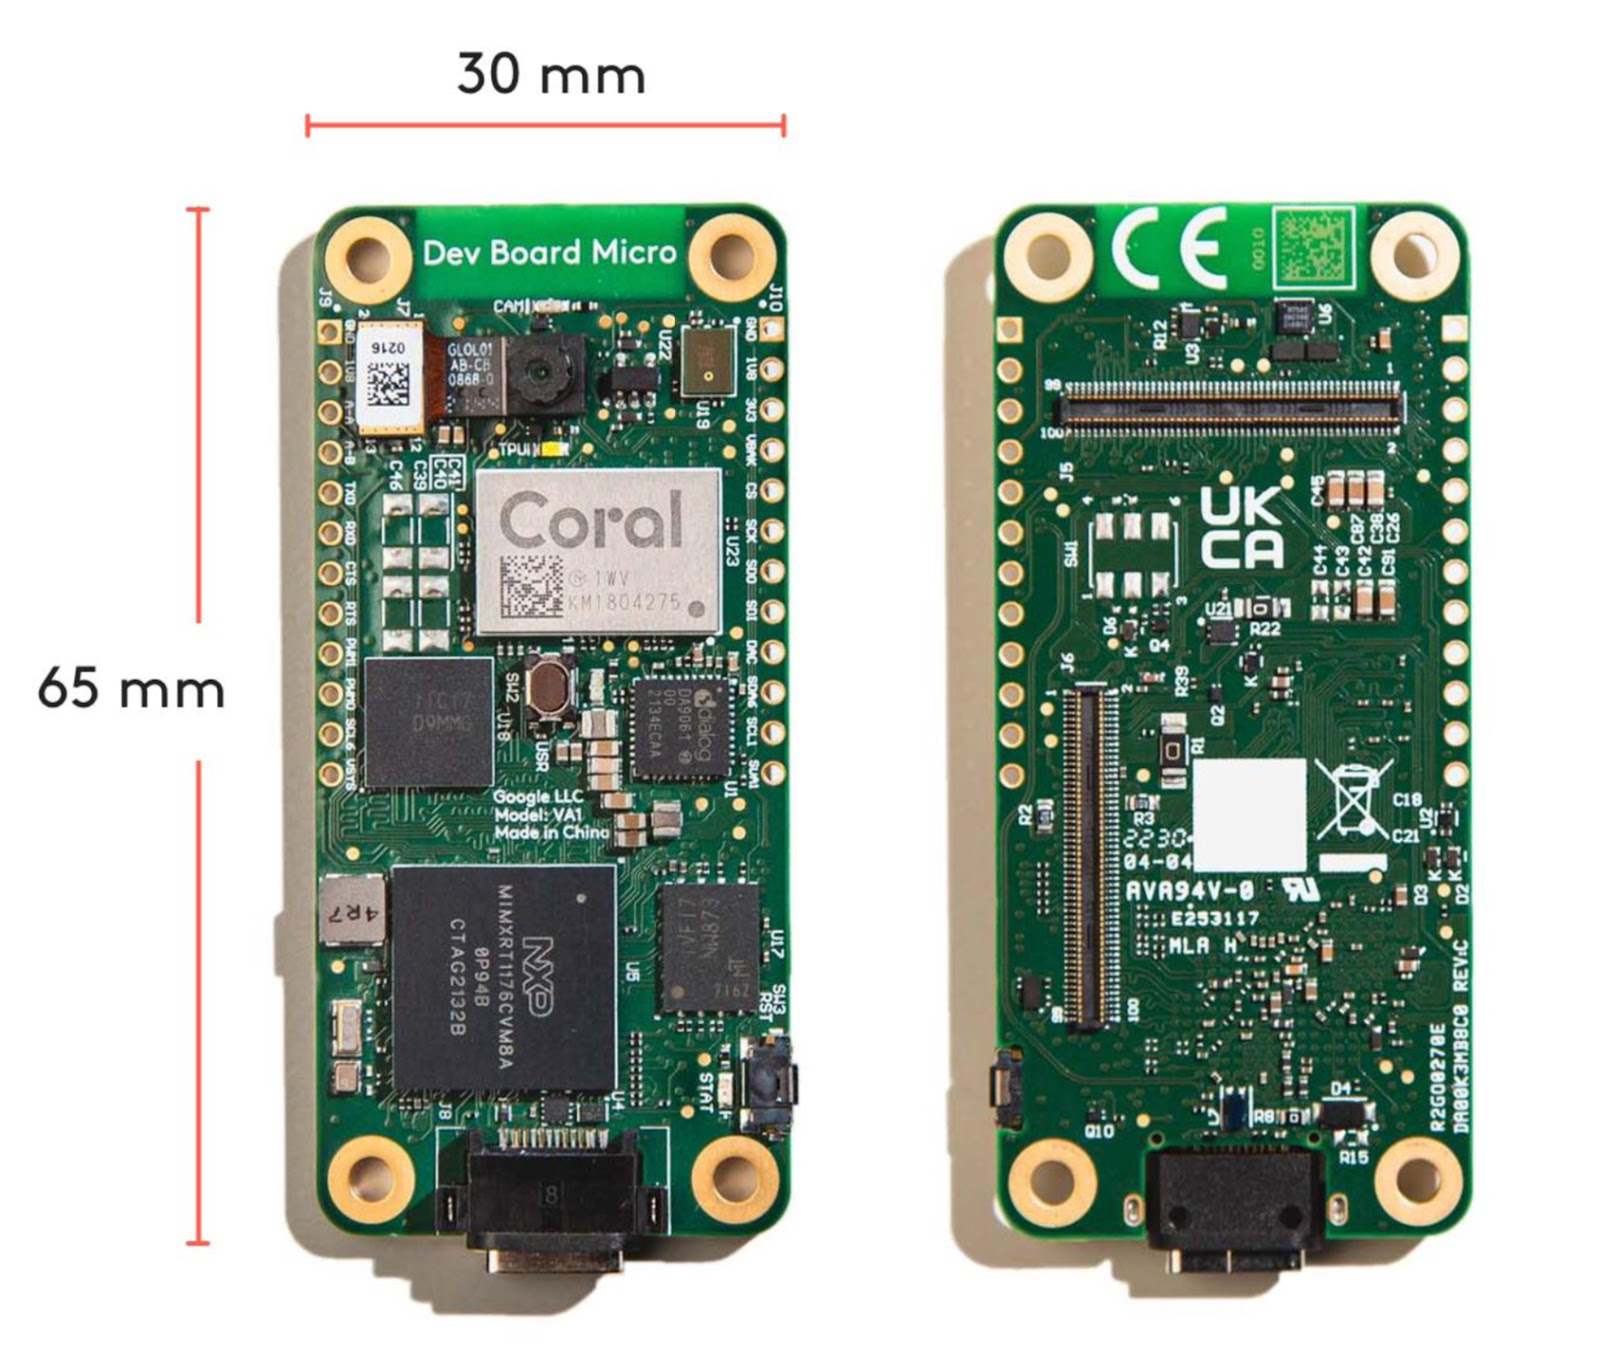 Official image of the Coral Dev Board Micro